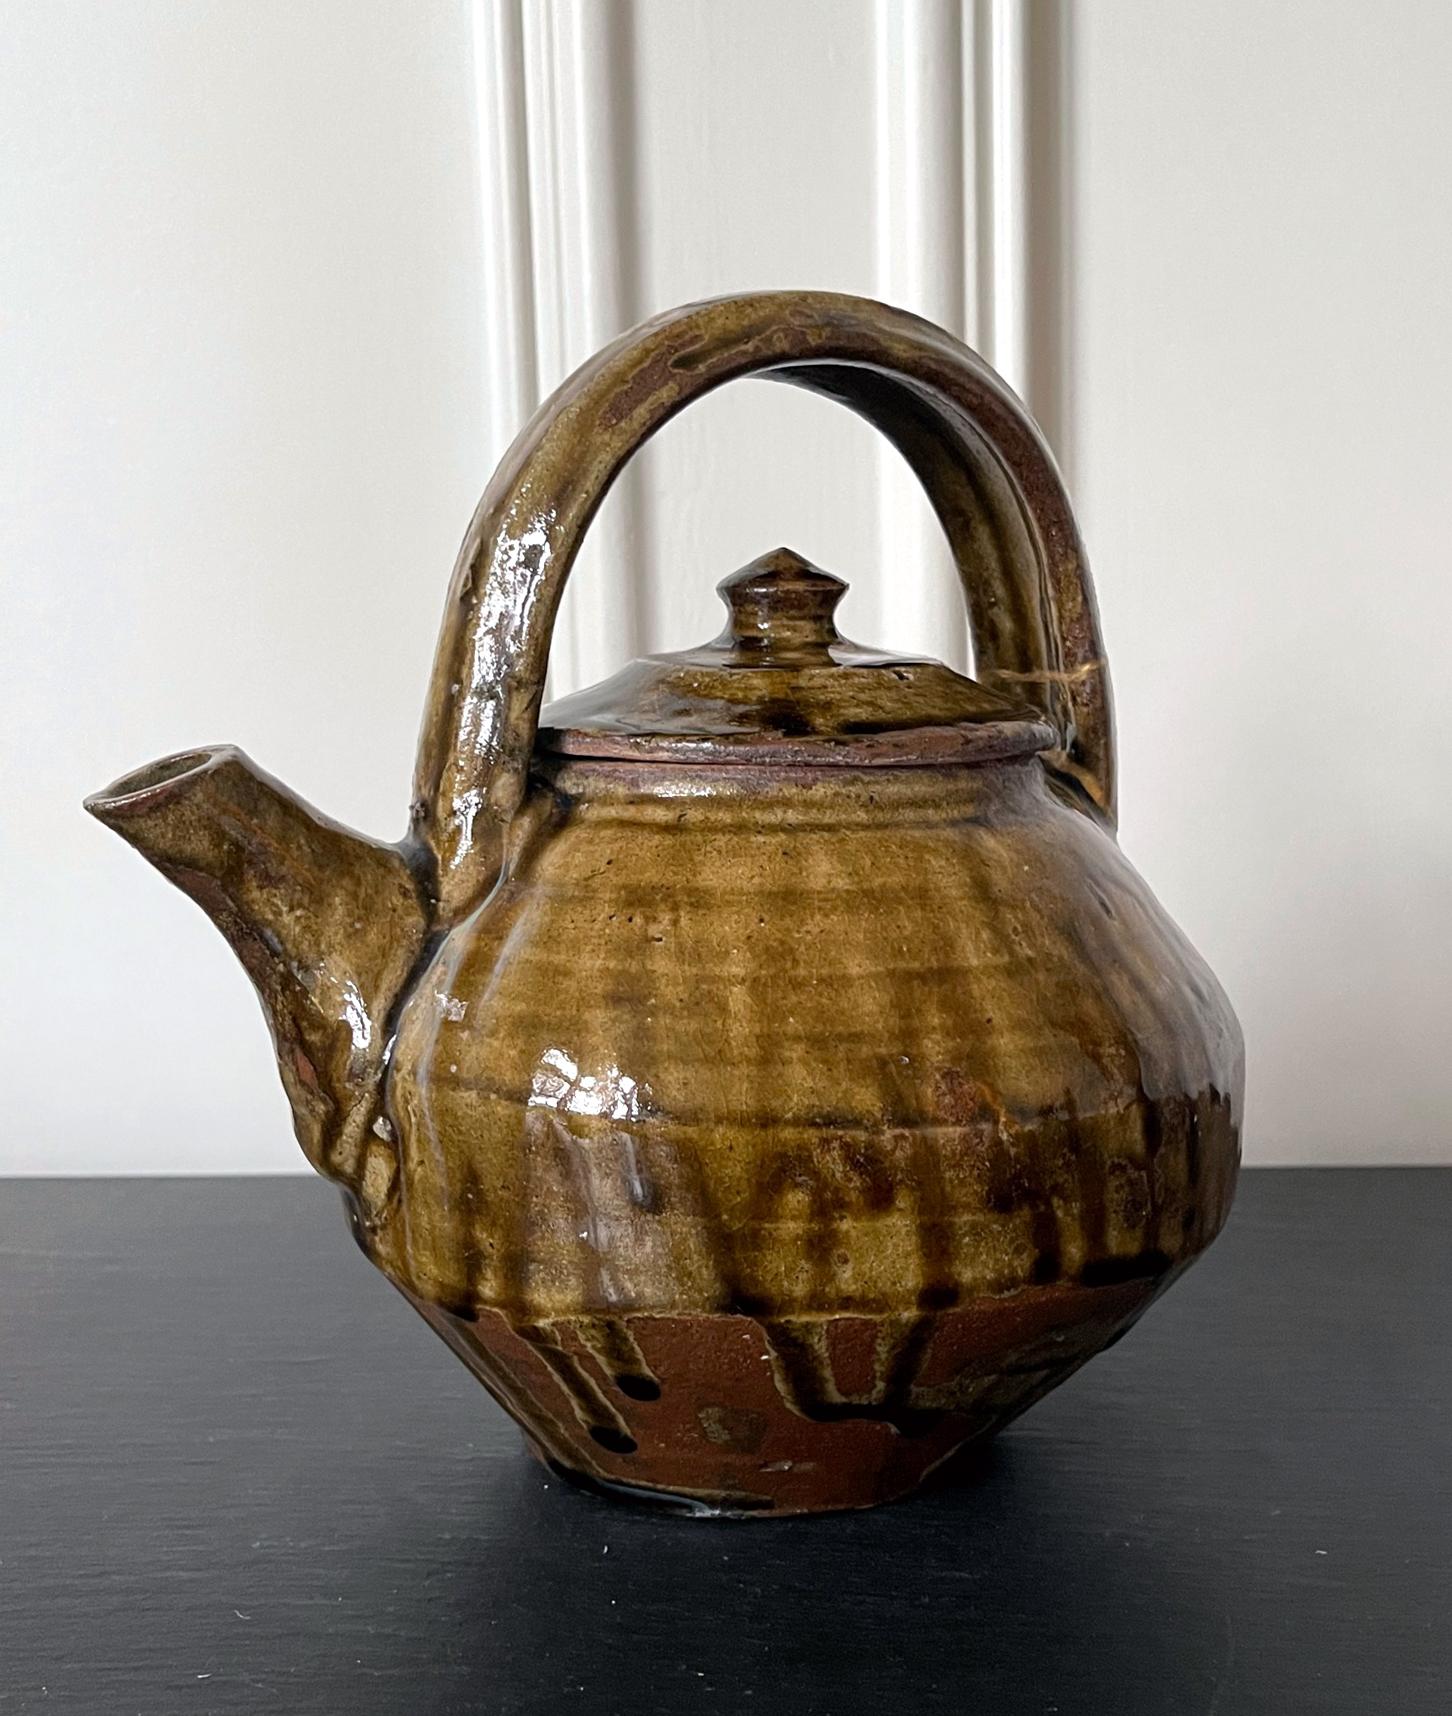 A Japanese stoneware tea pot by Hamada Shoji (Japanese 1894-1978) circa 1960-80s. The teapot is of the classic form and of a strong style of Mingei (folk art(. It was covered in a thick Nuka glaze (ashes from husks of rice hulls) with prominent